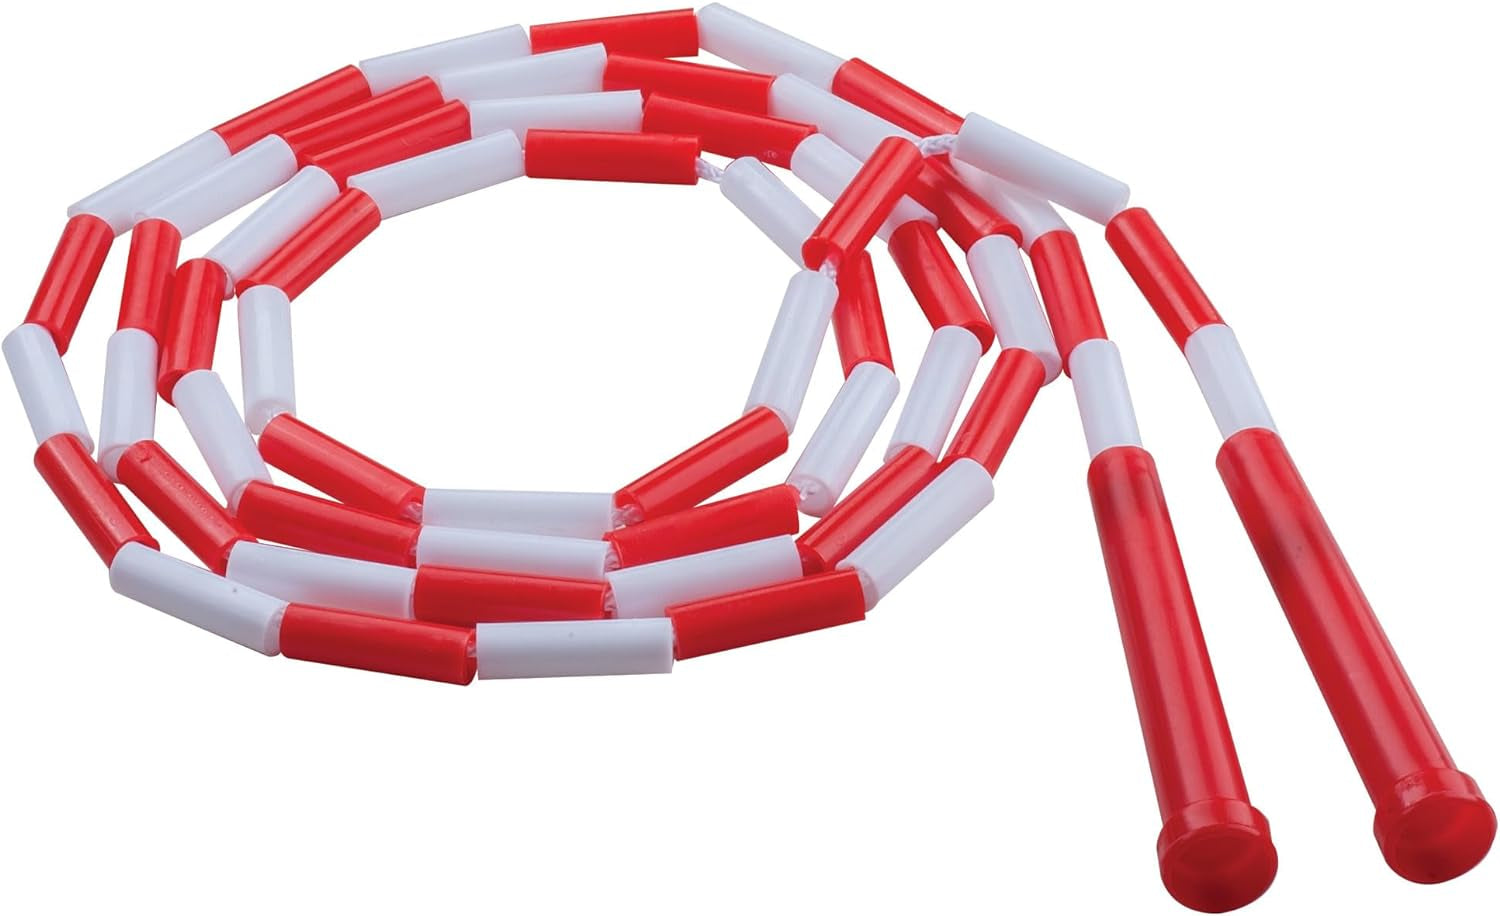 Classic Plastic Segmented Beaded Jump Ropes - Phys. Ed, Gym, Fitness and Recreational Use, in a Variety of Lengths for Kids to Adults